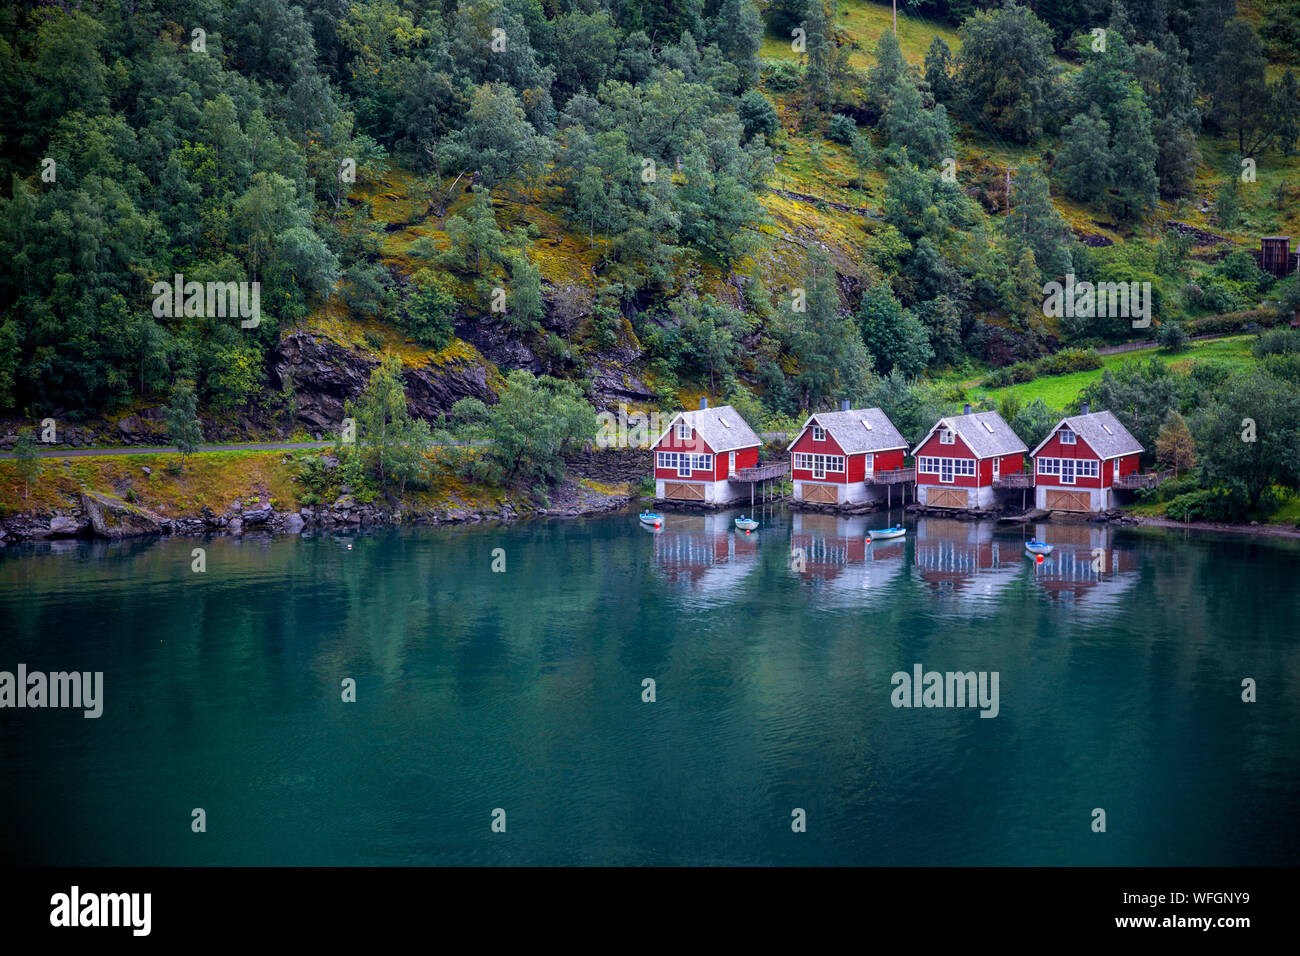 Row of Houses overlooking Aurlandsfjord, Flam, Flamsdalen, Sogn og Fjordane, Norway Stock Photo